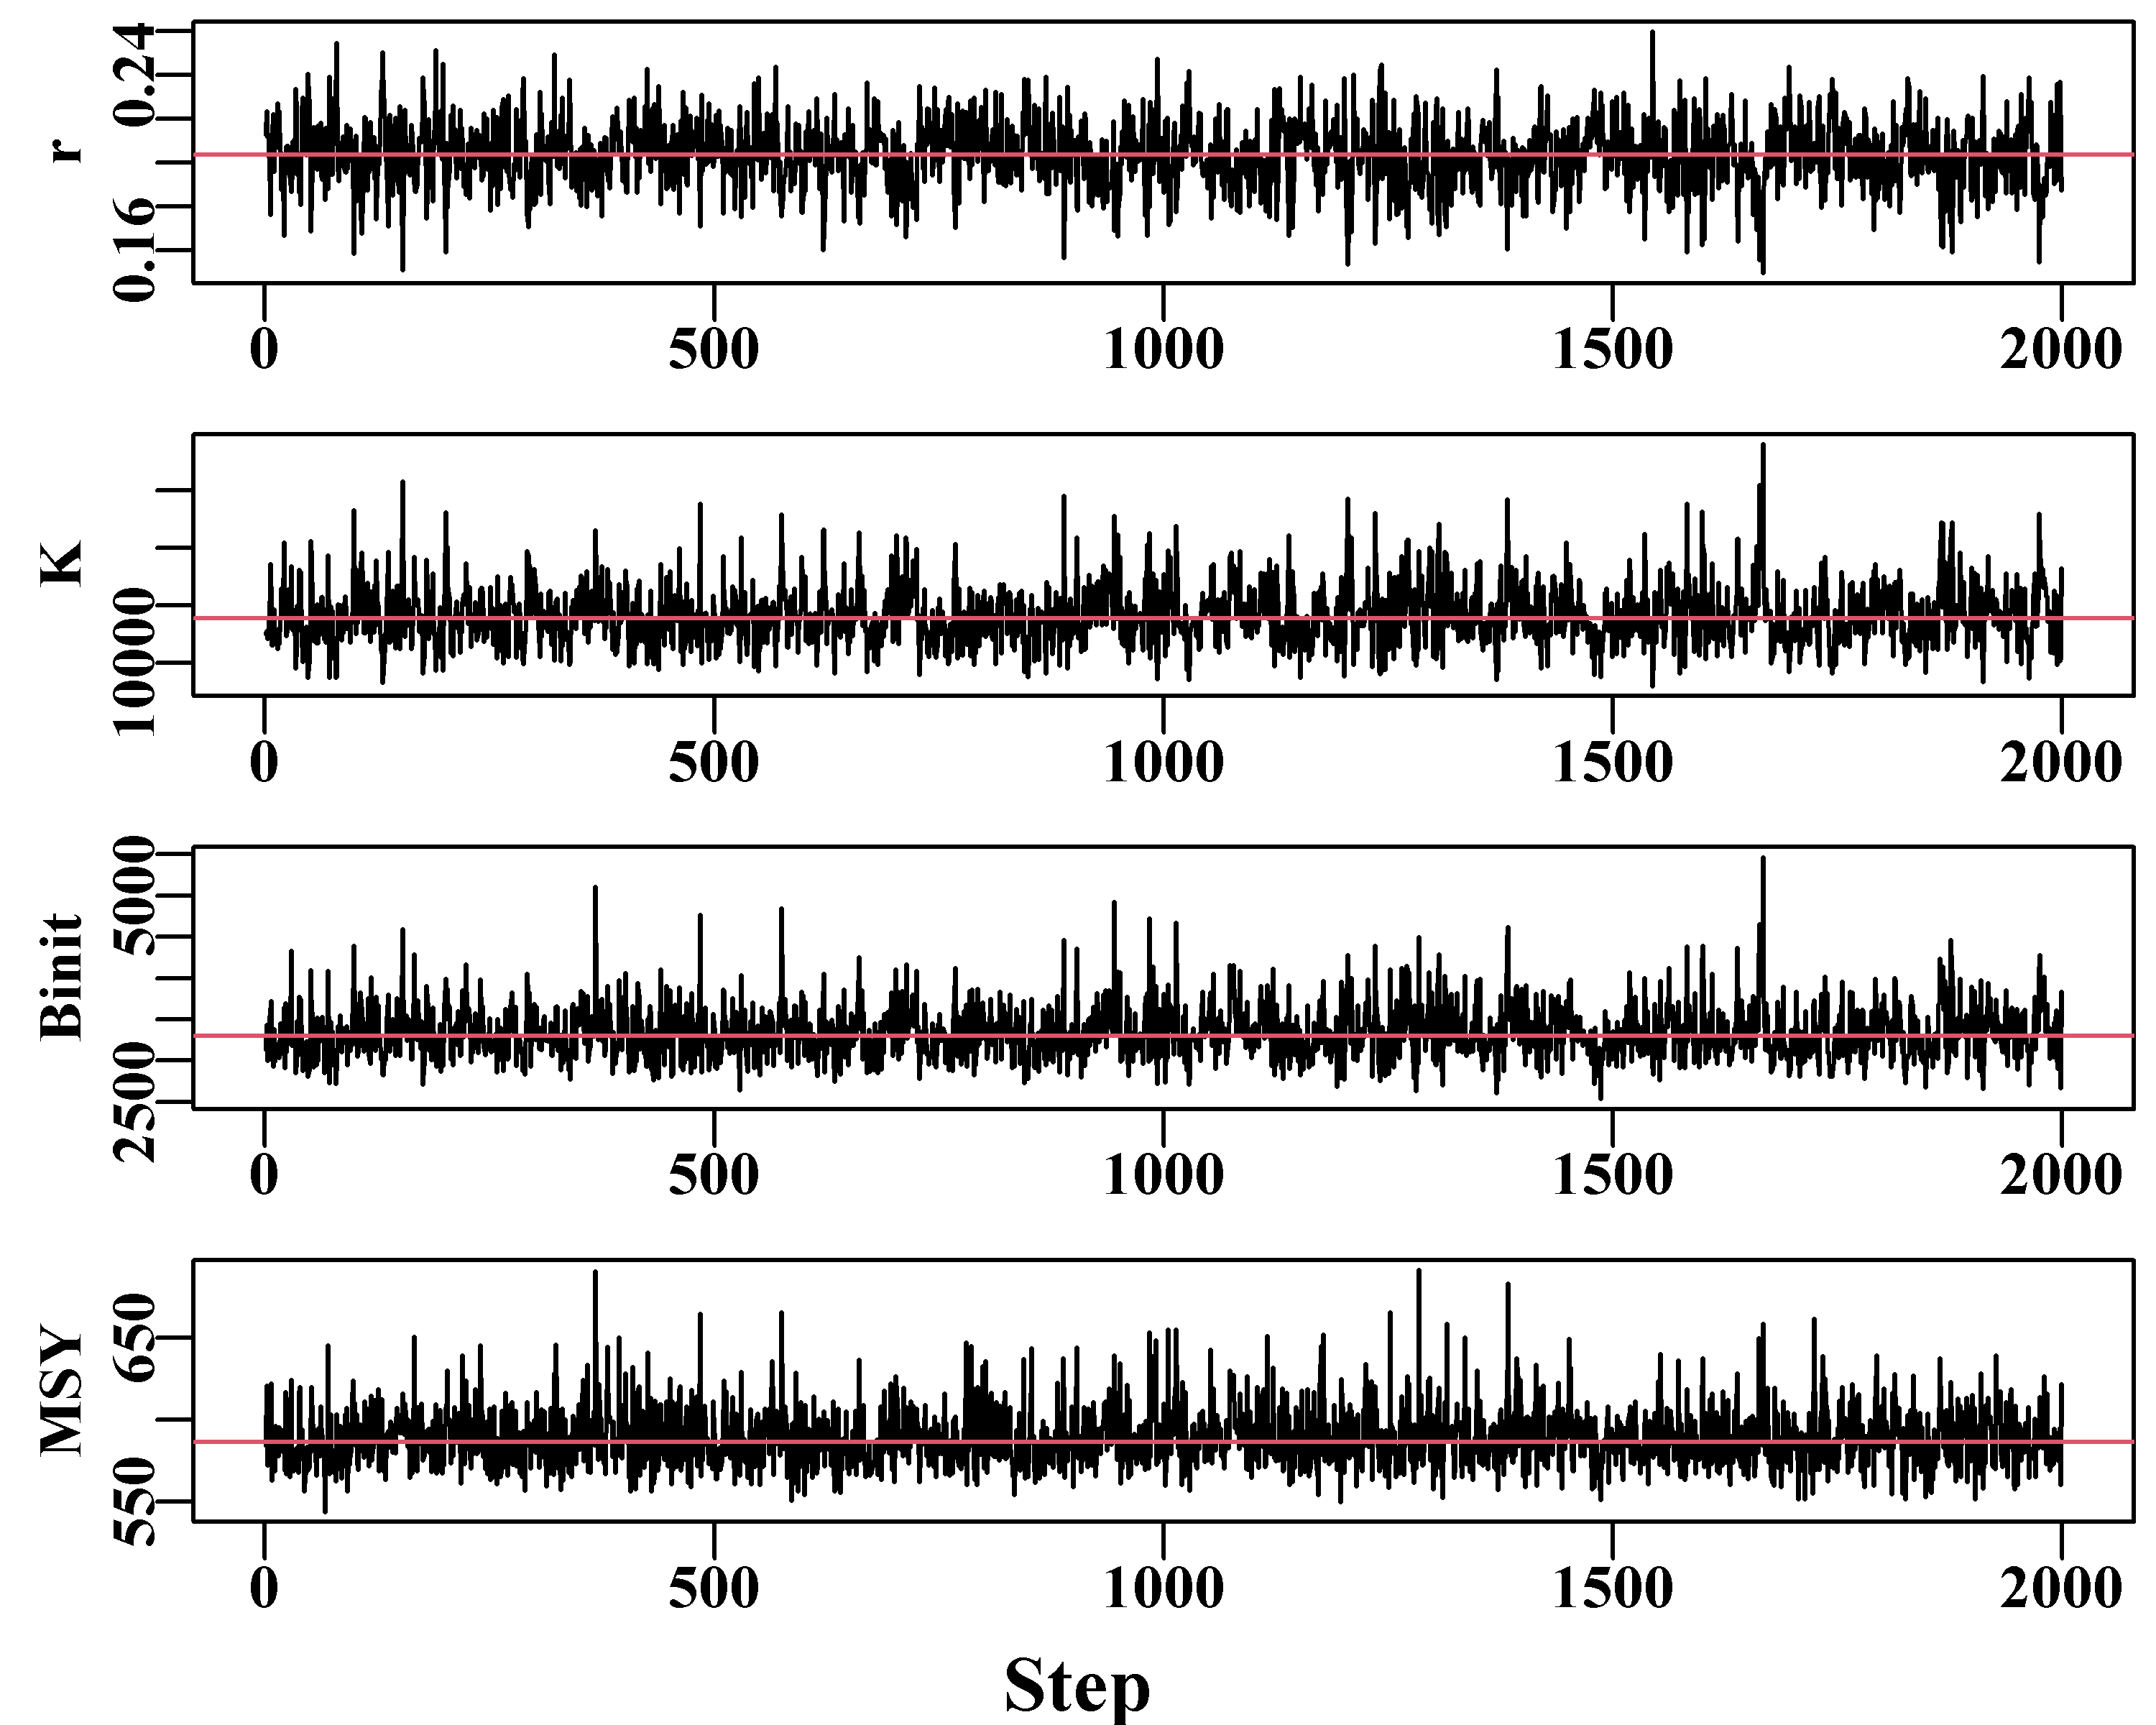 The traces for the three main Schaefer model parameters and the MSY estimates. The remaining auto-correlation within traces should be improved if the thinning step were increased to 1024 or longer.